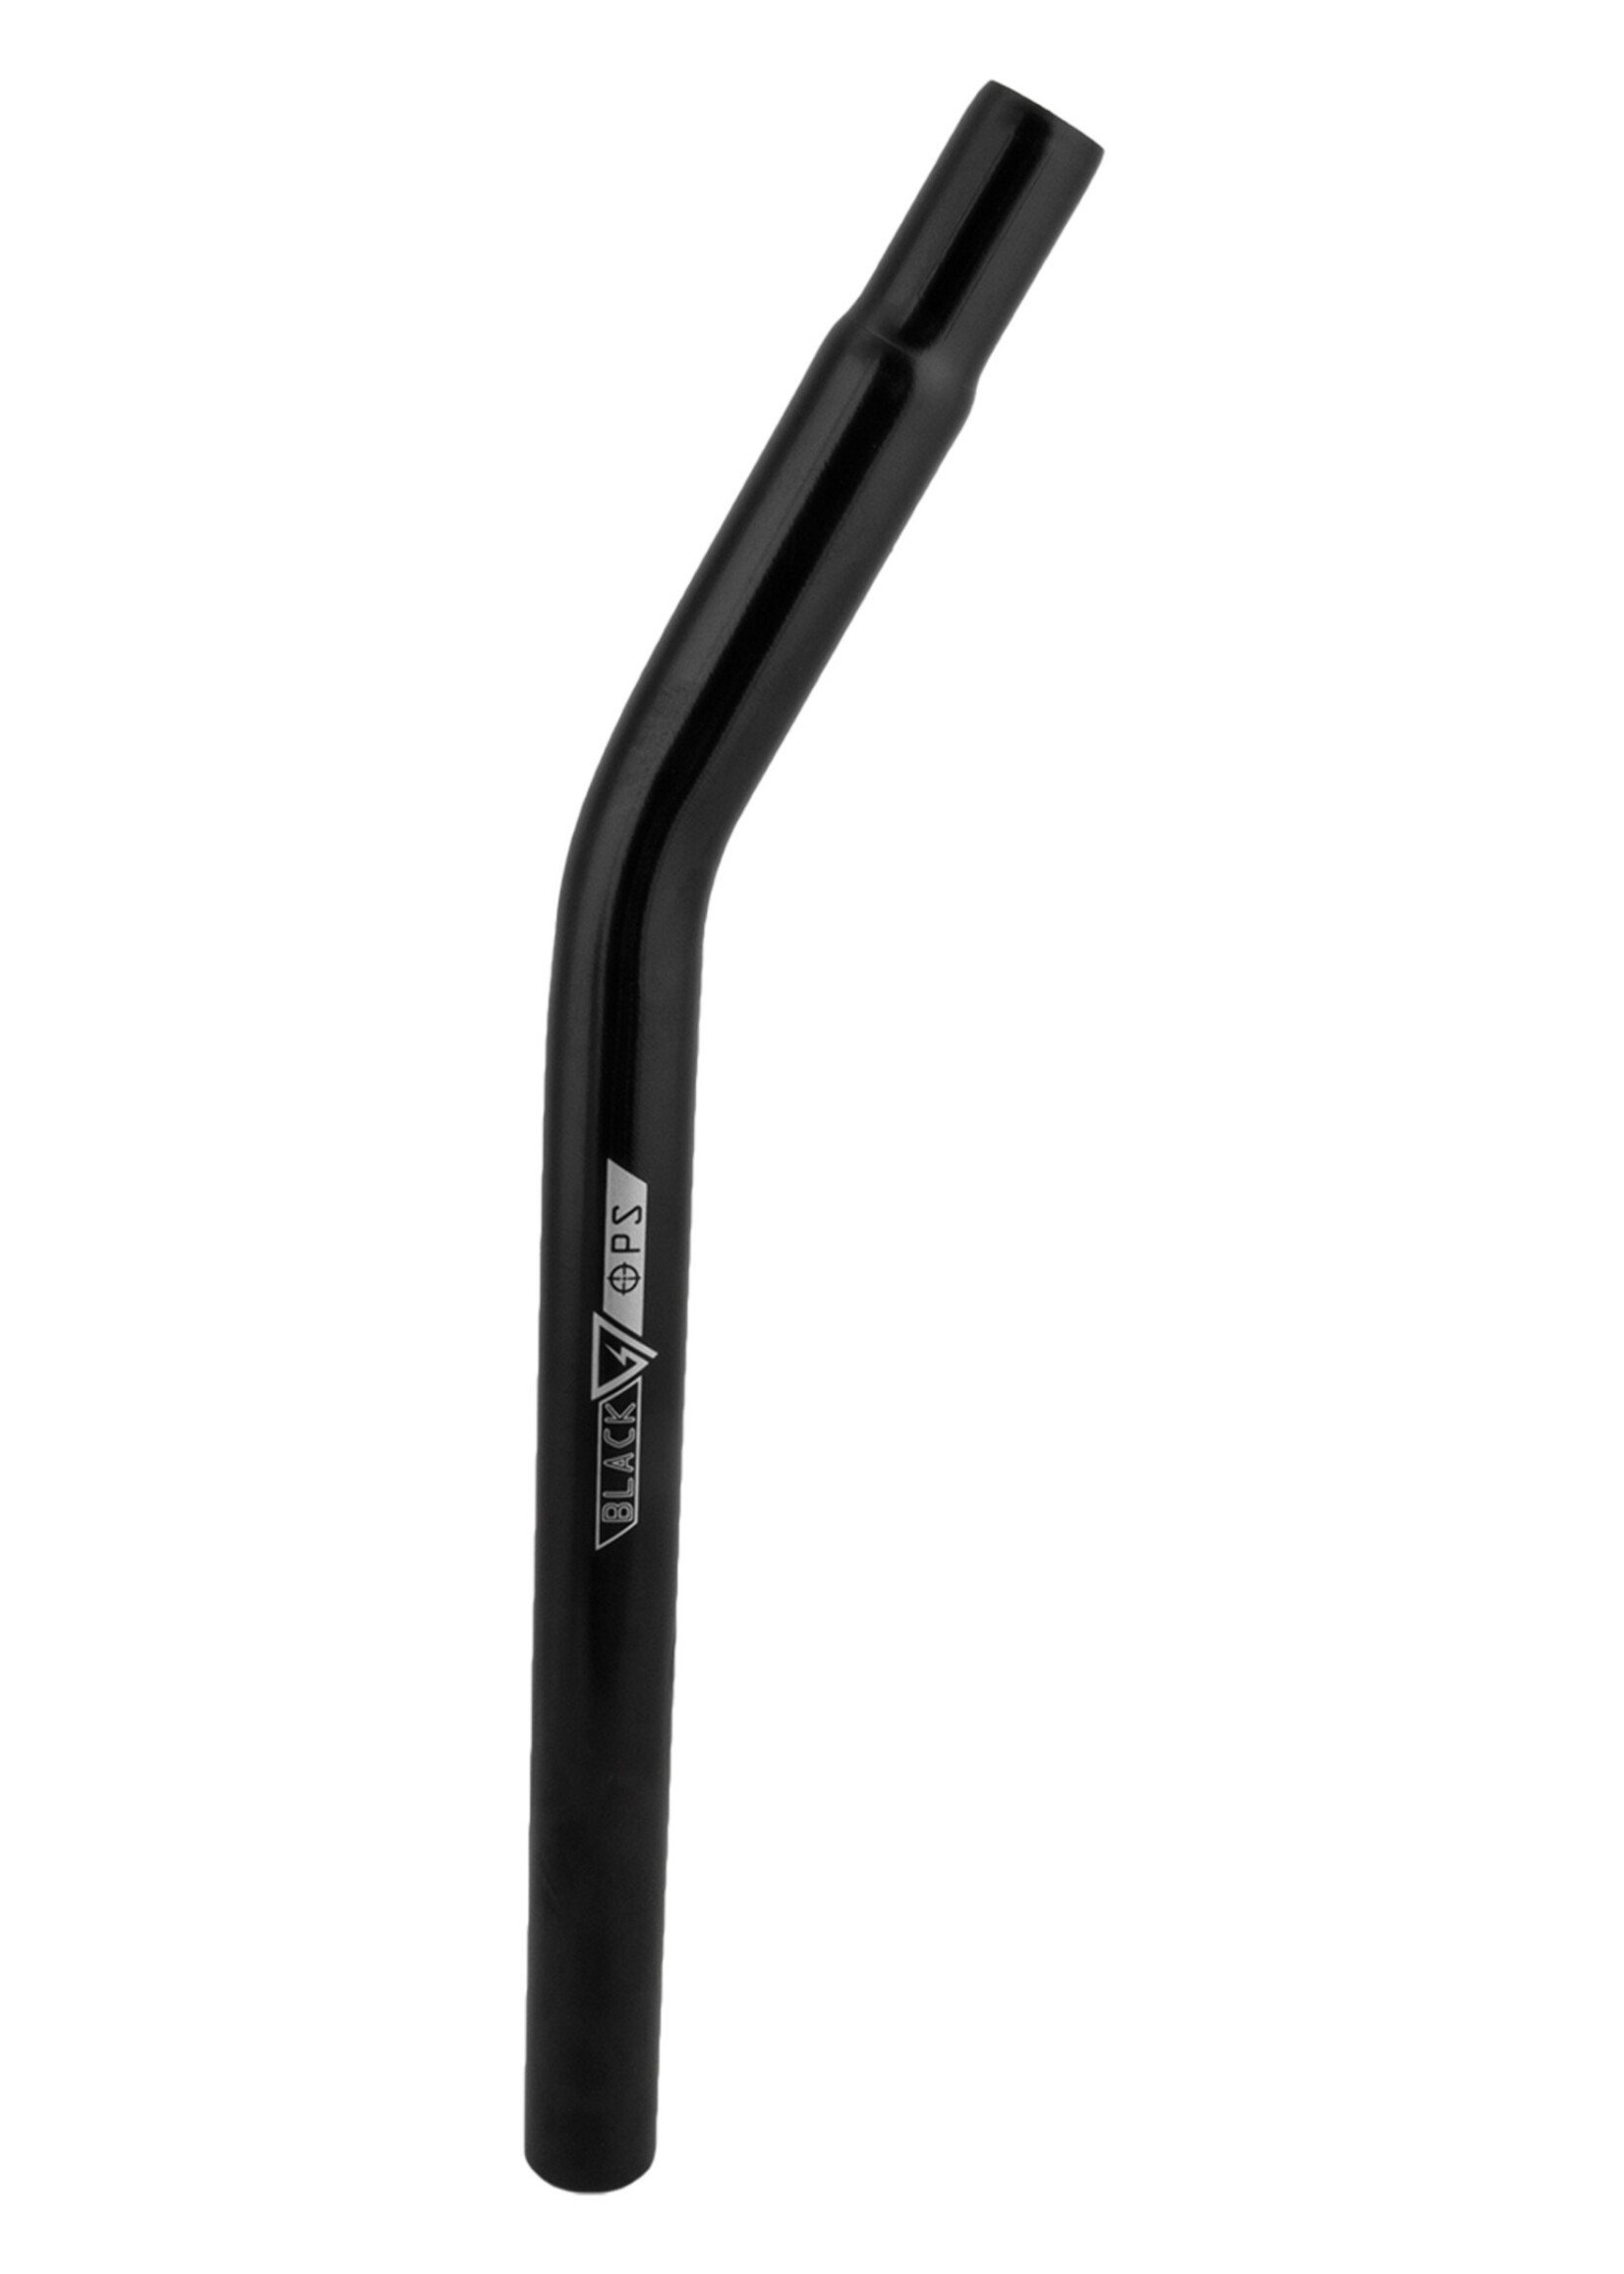 BLACK OPS SEATPOST BK-OPS LAYBACK NO-SUPPORT CRMO BK 380x25.4mm